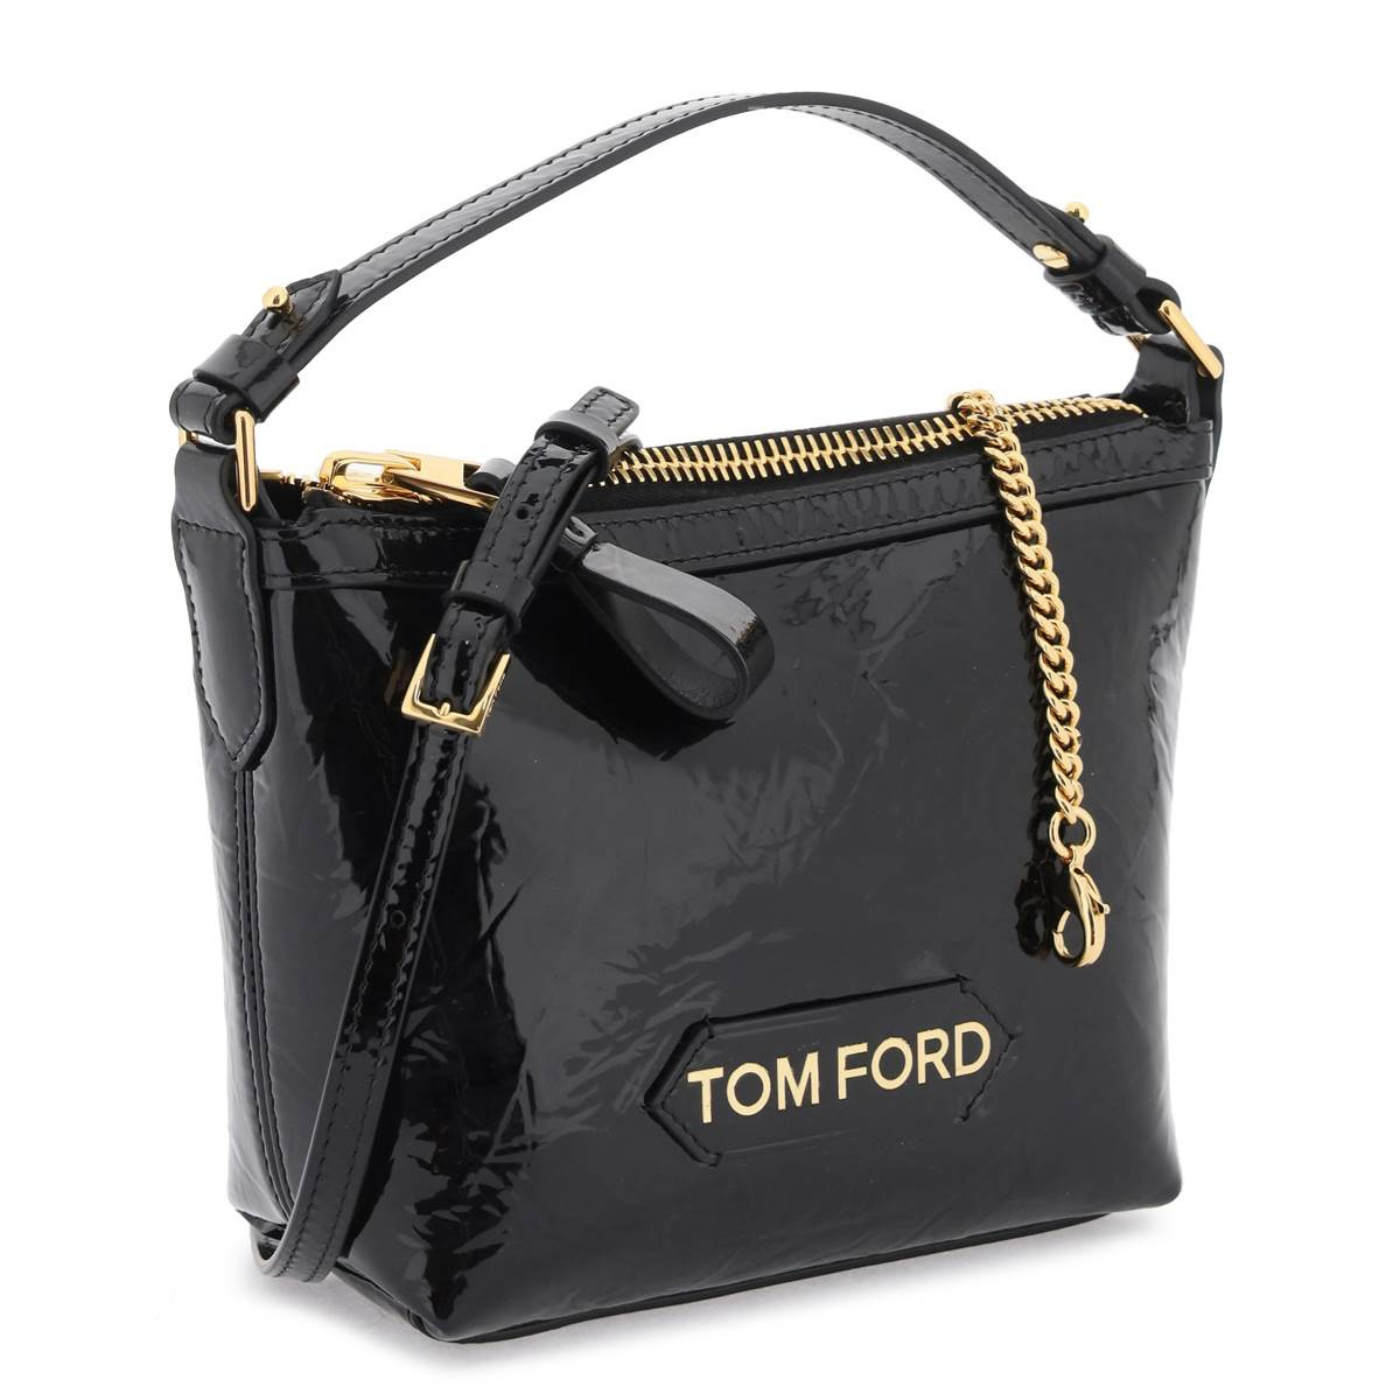 TF Crinkled Patent Leather Small Pouch in Black Handbags TOM FORD - LOLAMIR